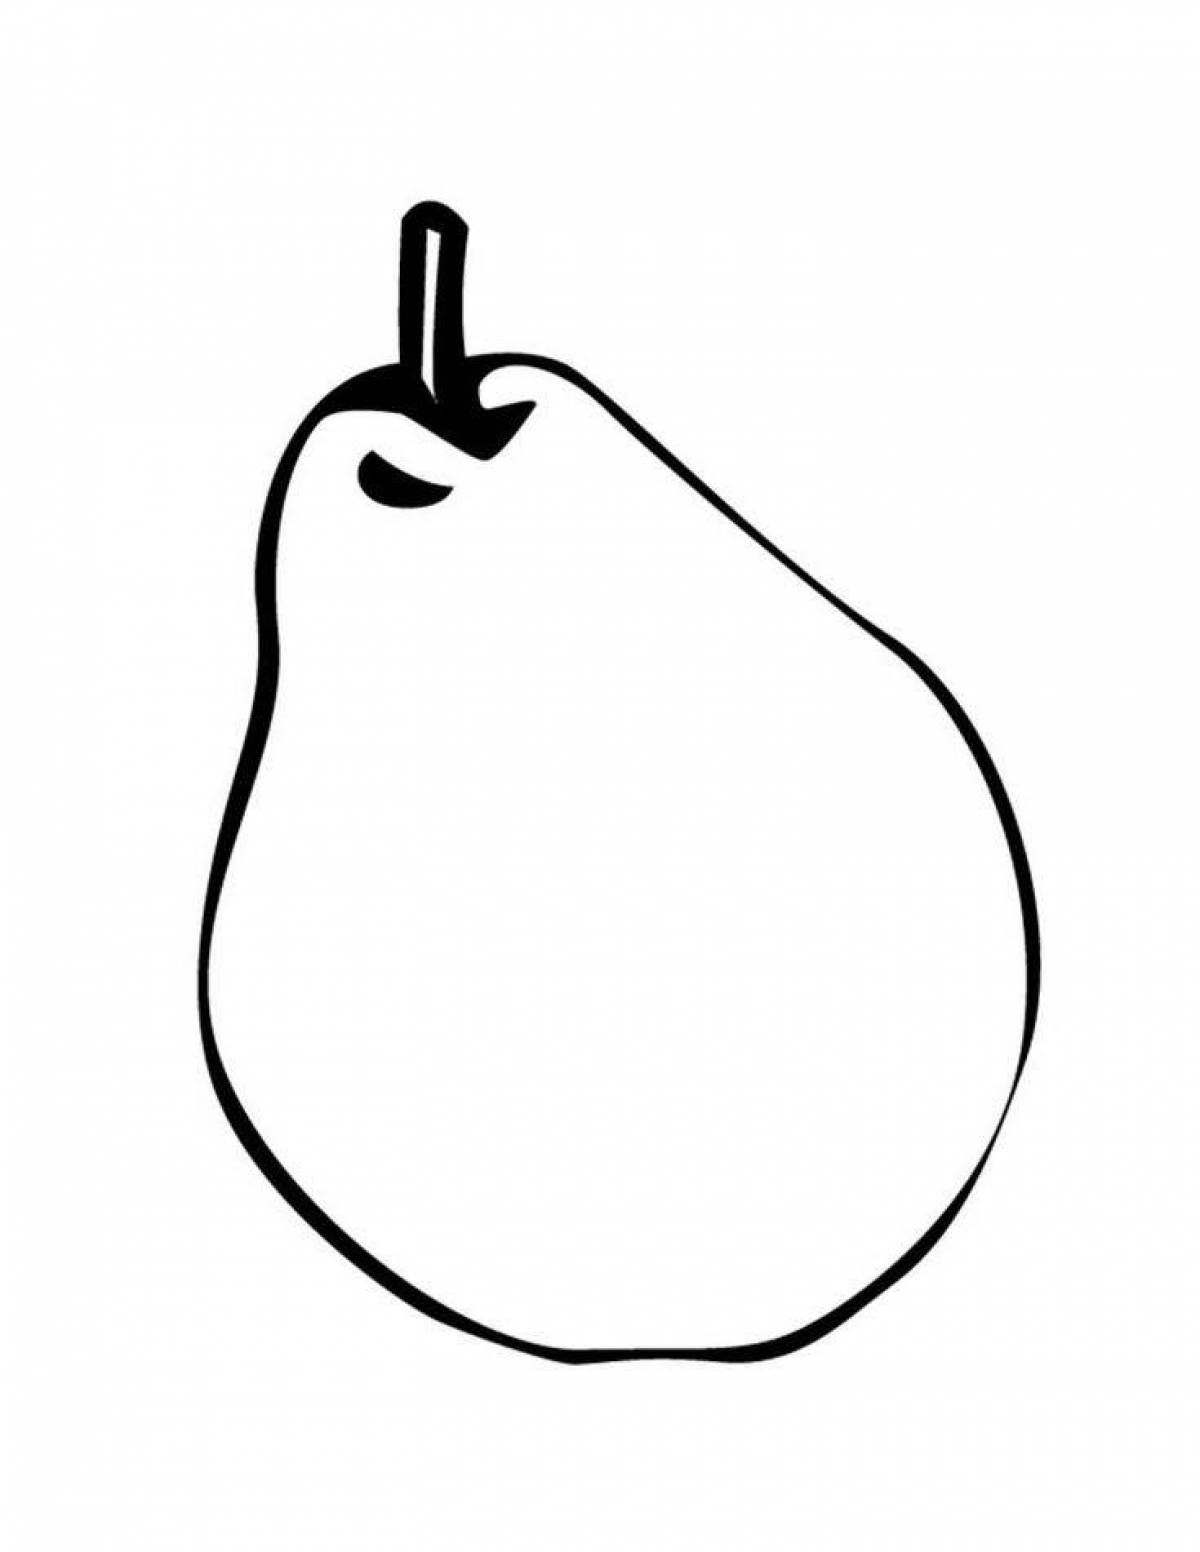 Coloring pear for kids